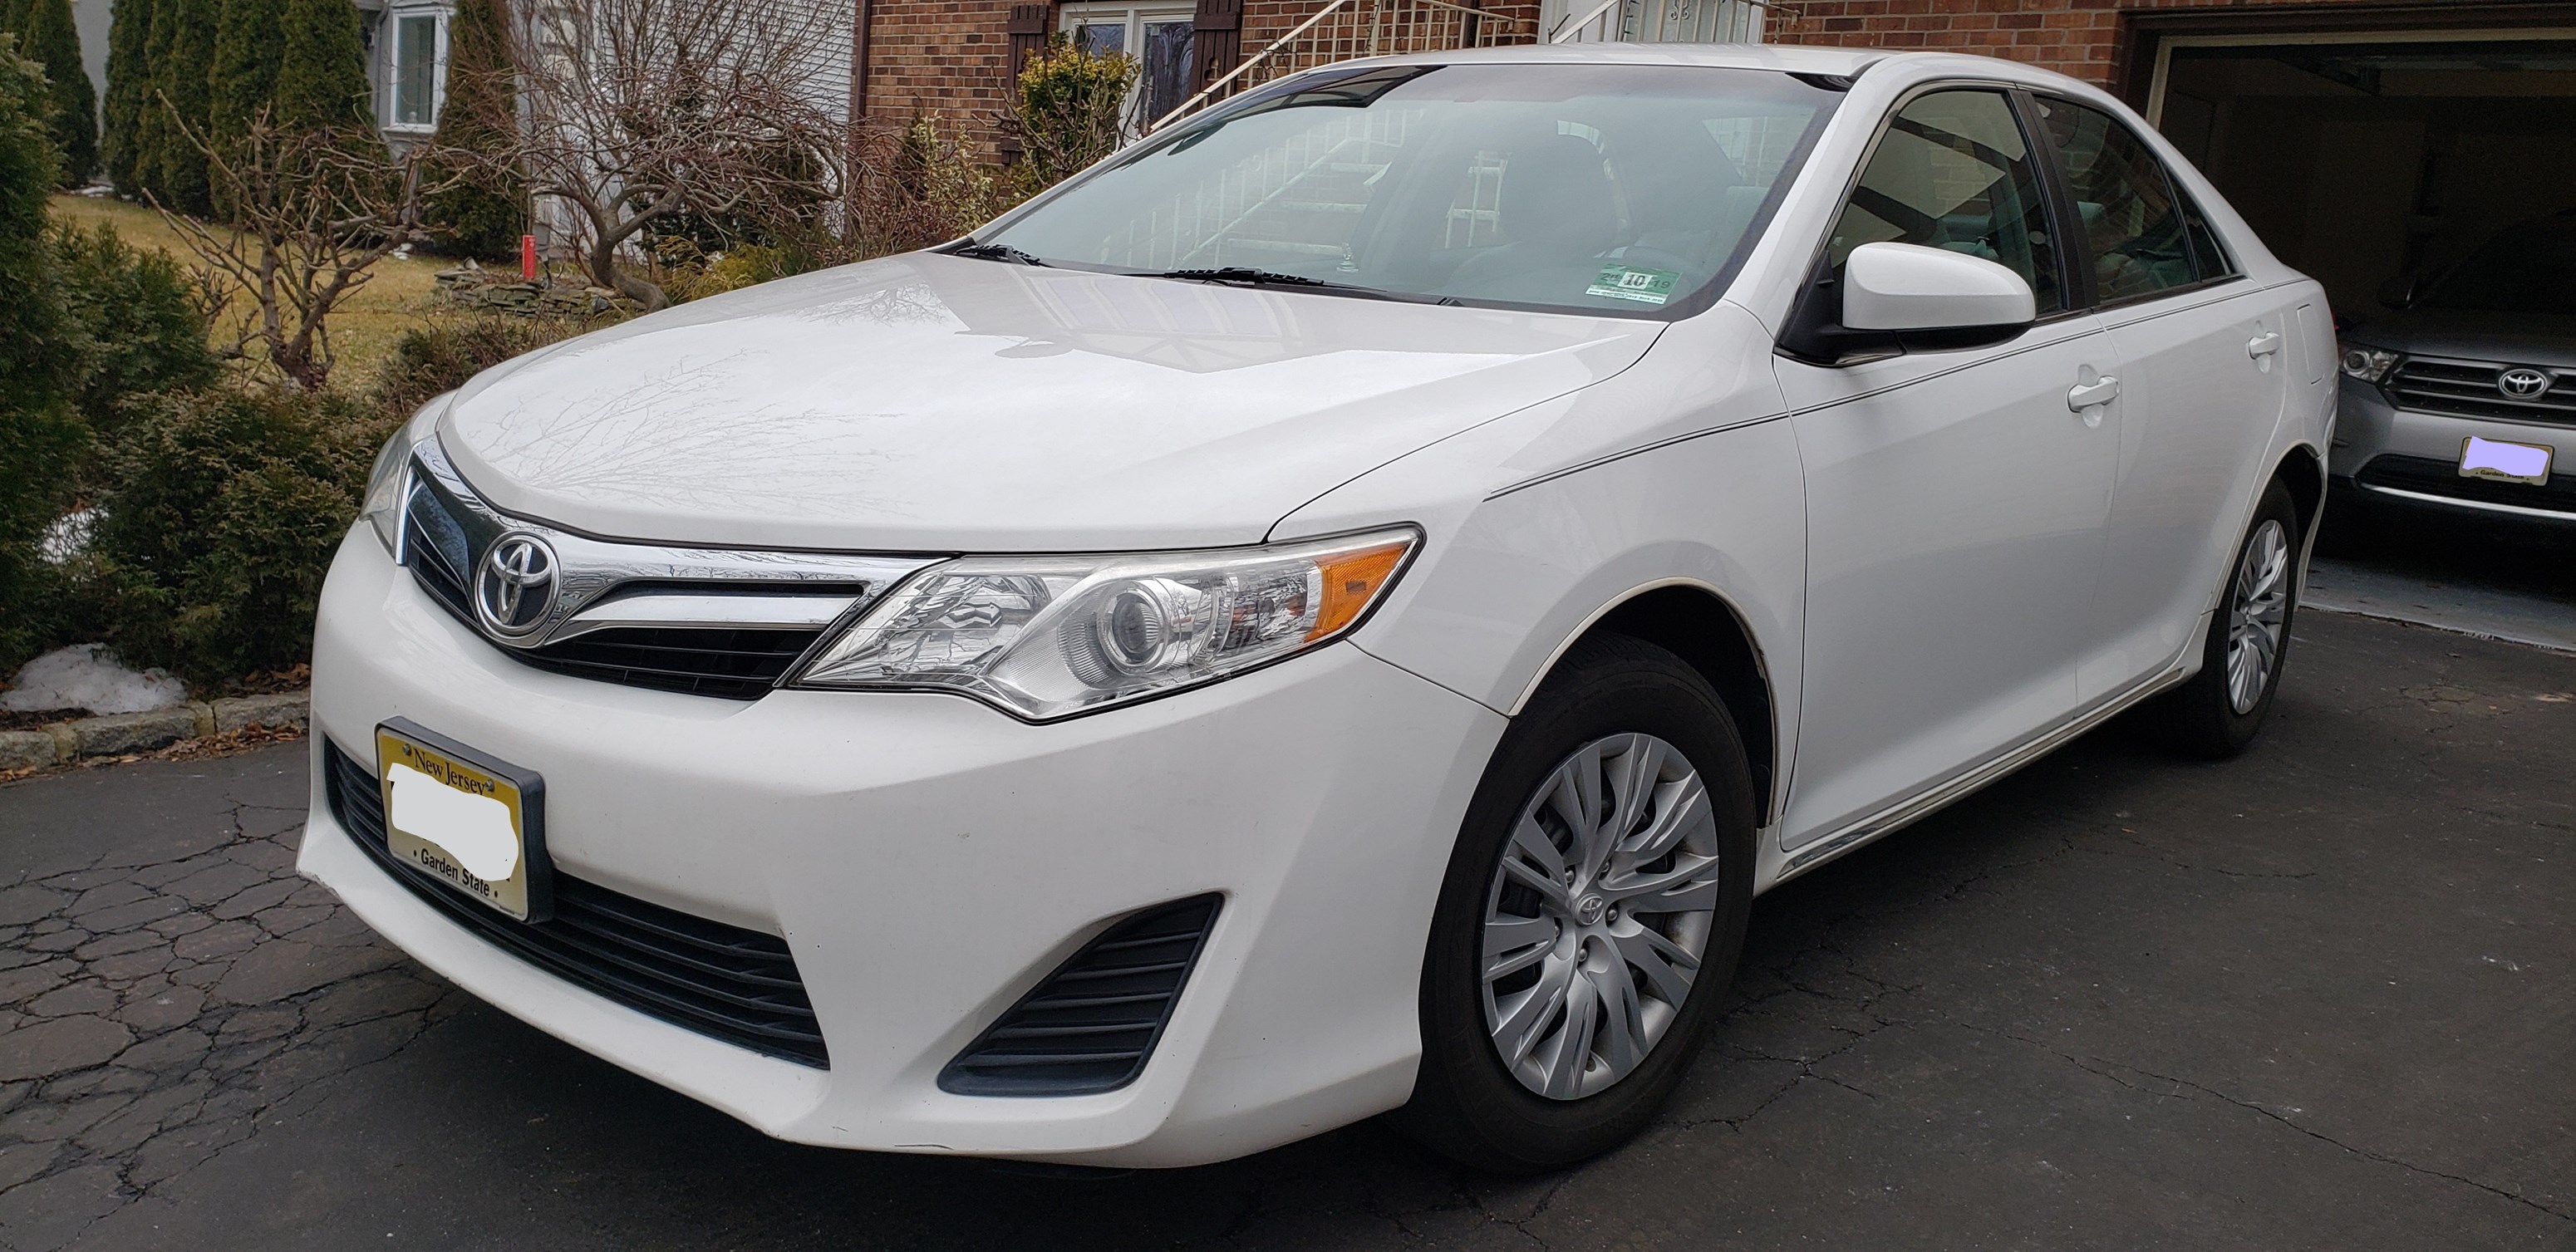 2012 Toyota Camry, White, 61.5K Miles $9,500 LeatherSeats Excellent ...